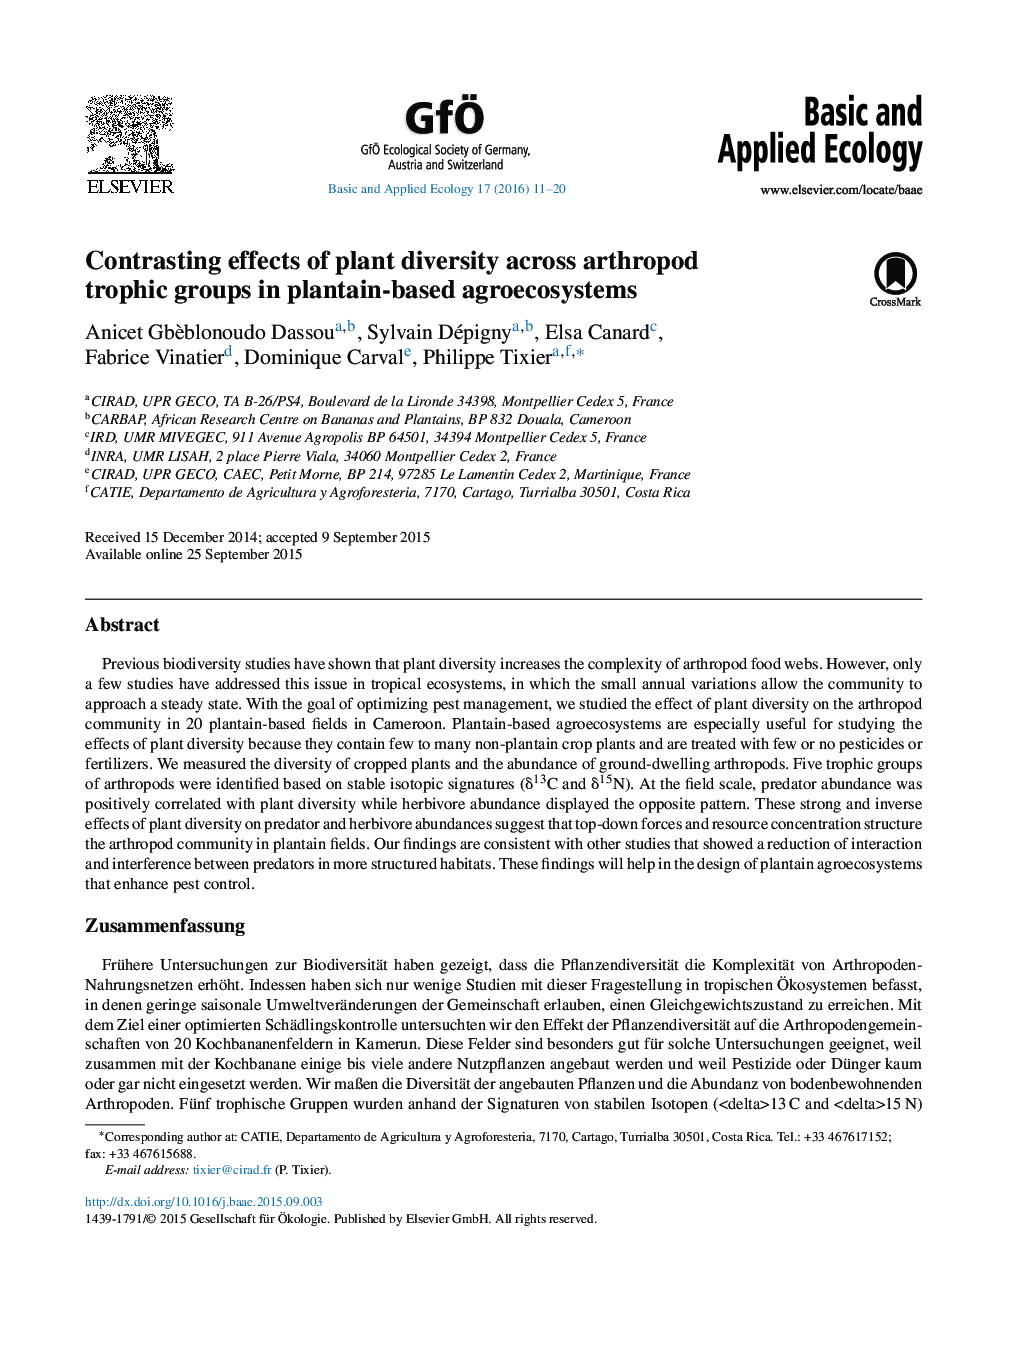 Contrasting effects of plant diversity across arthropod trophic groups in plantain-based agroecosystems